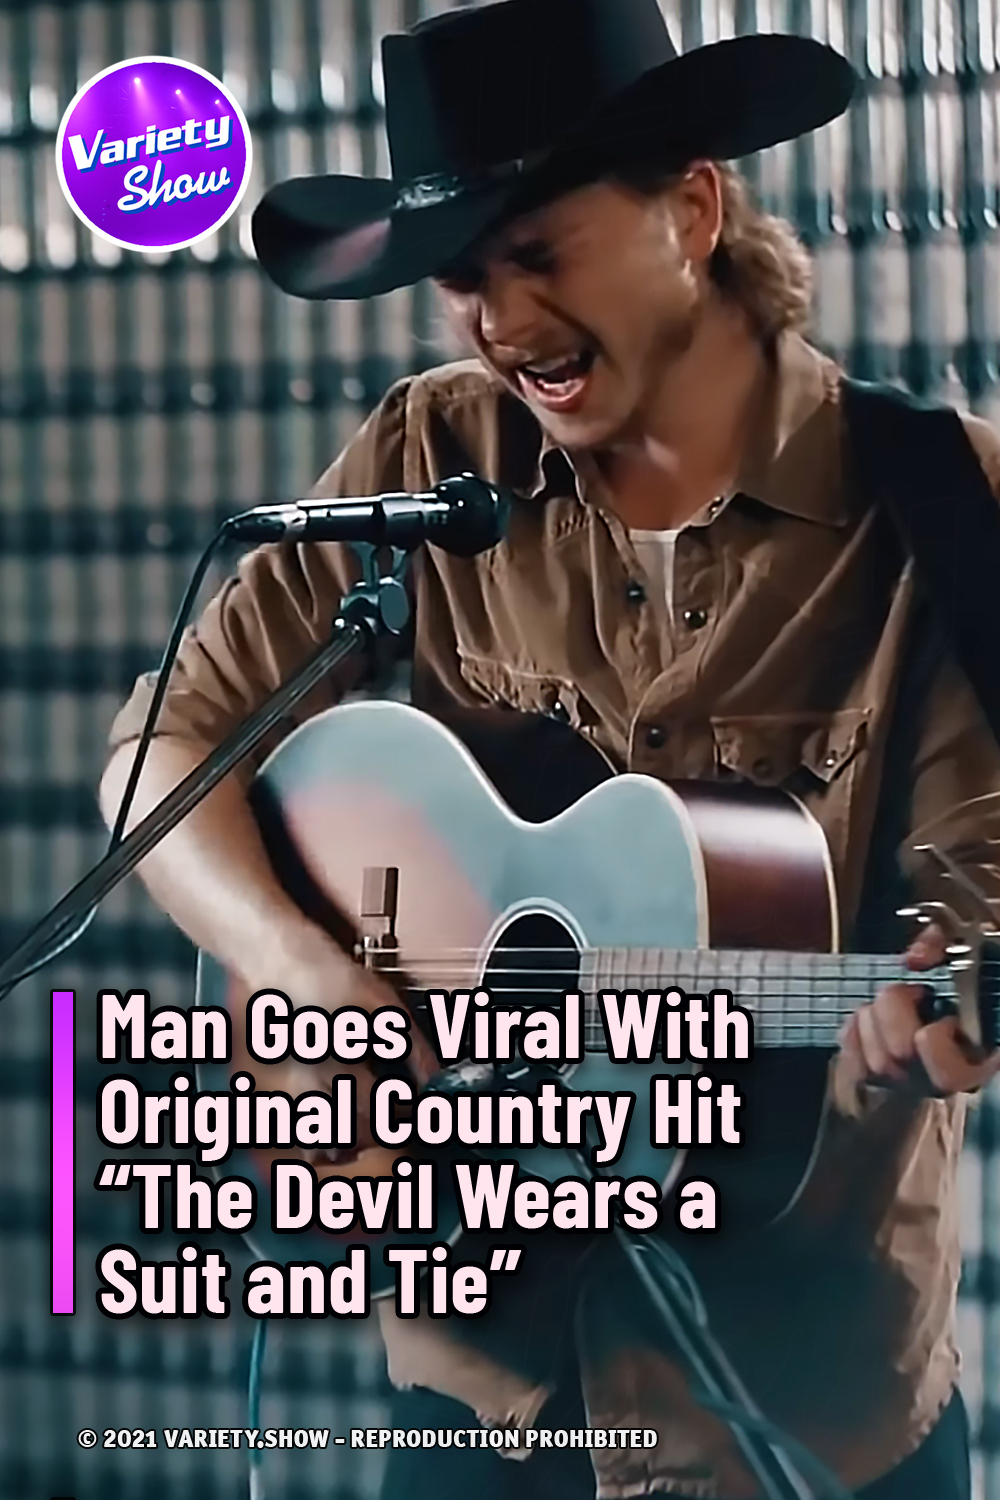 Man Goes Viral With Original Country Hit “The Devil Wears a Suit and Tie”